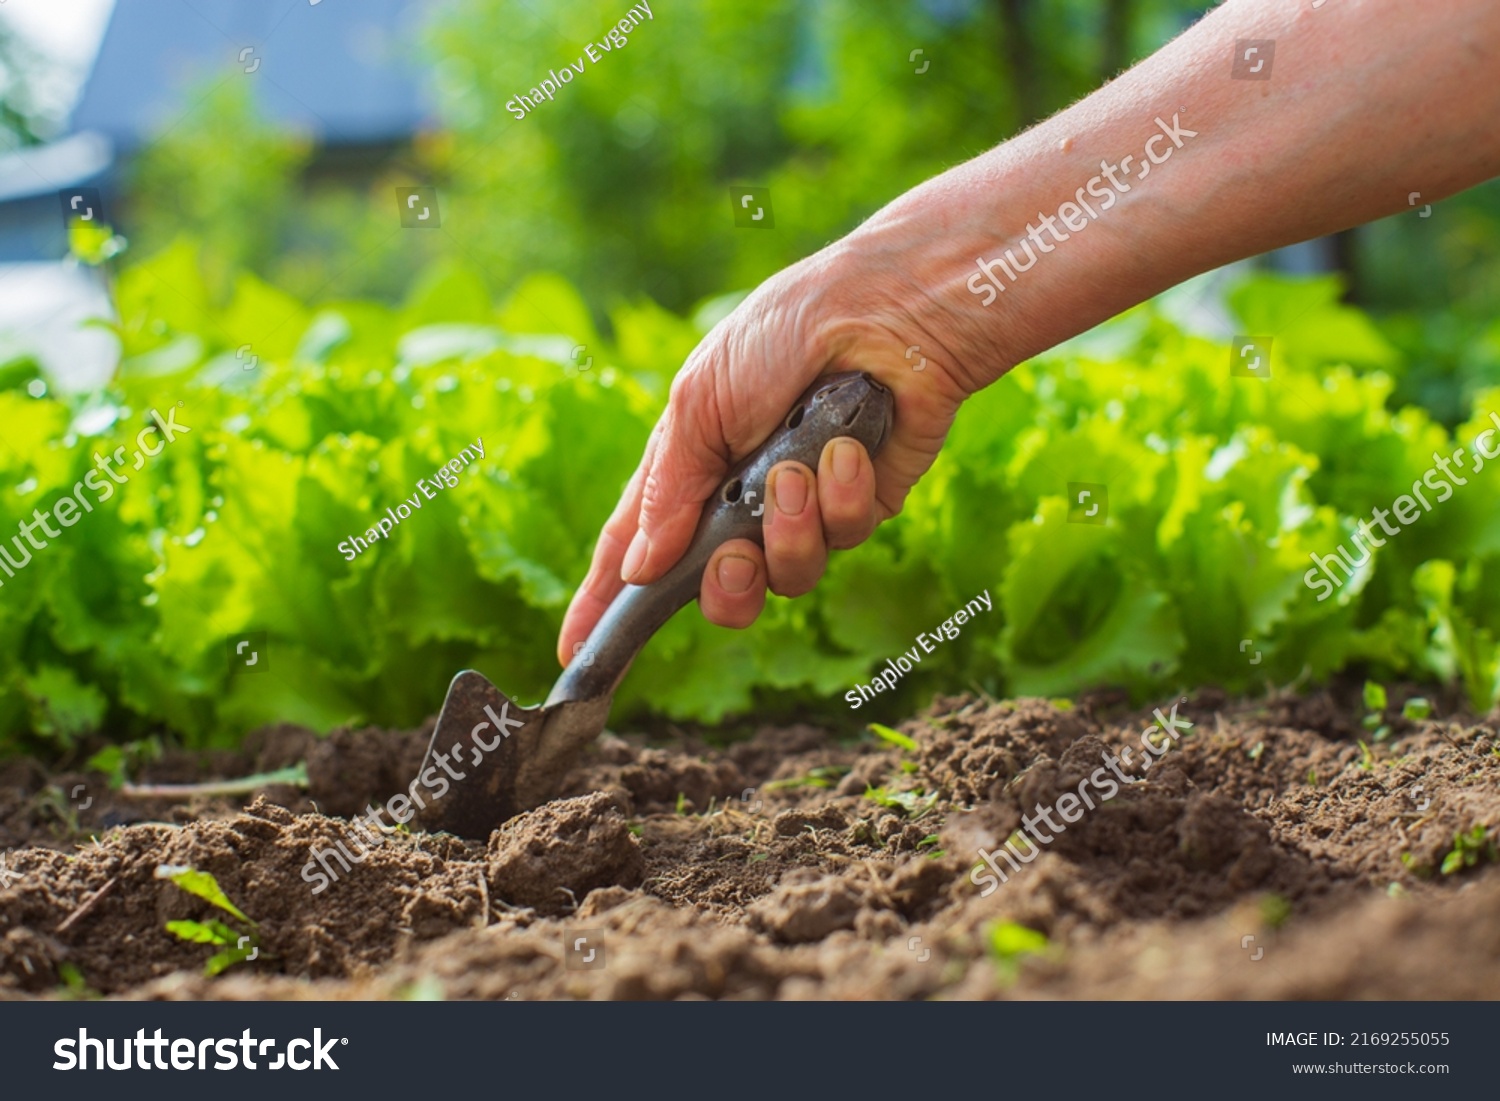 Planting plants on a vegetable bed in the garden. Cultivated land close up. Gardening concept. Agriculture plants growing in bed row. #2169255055